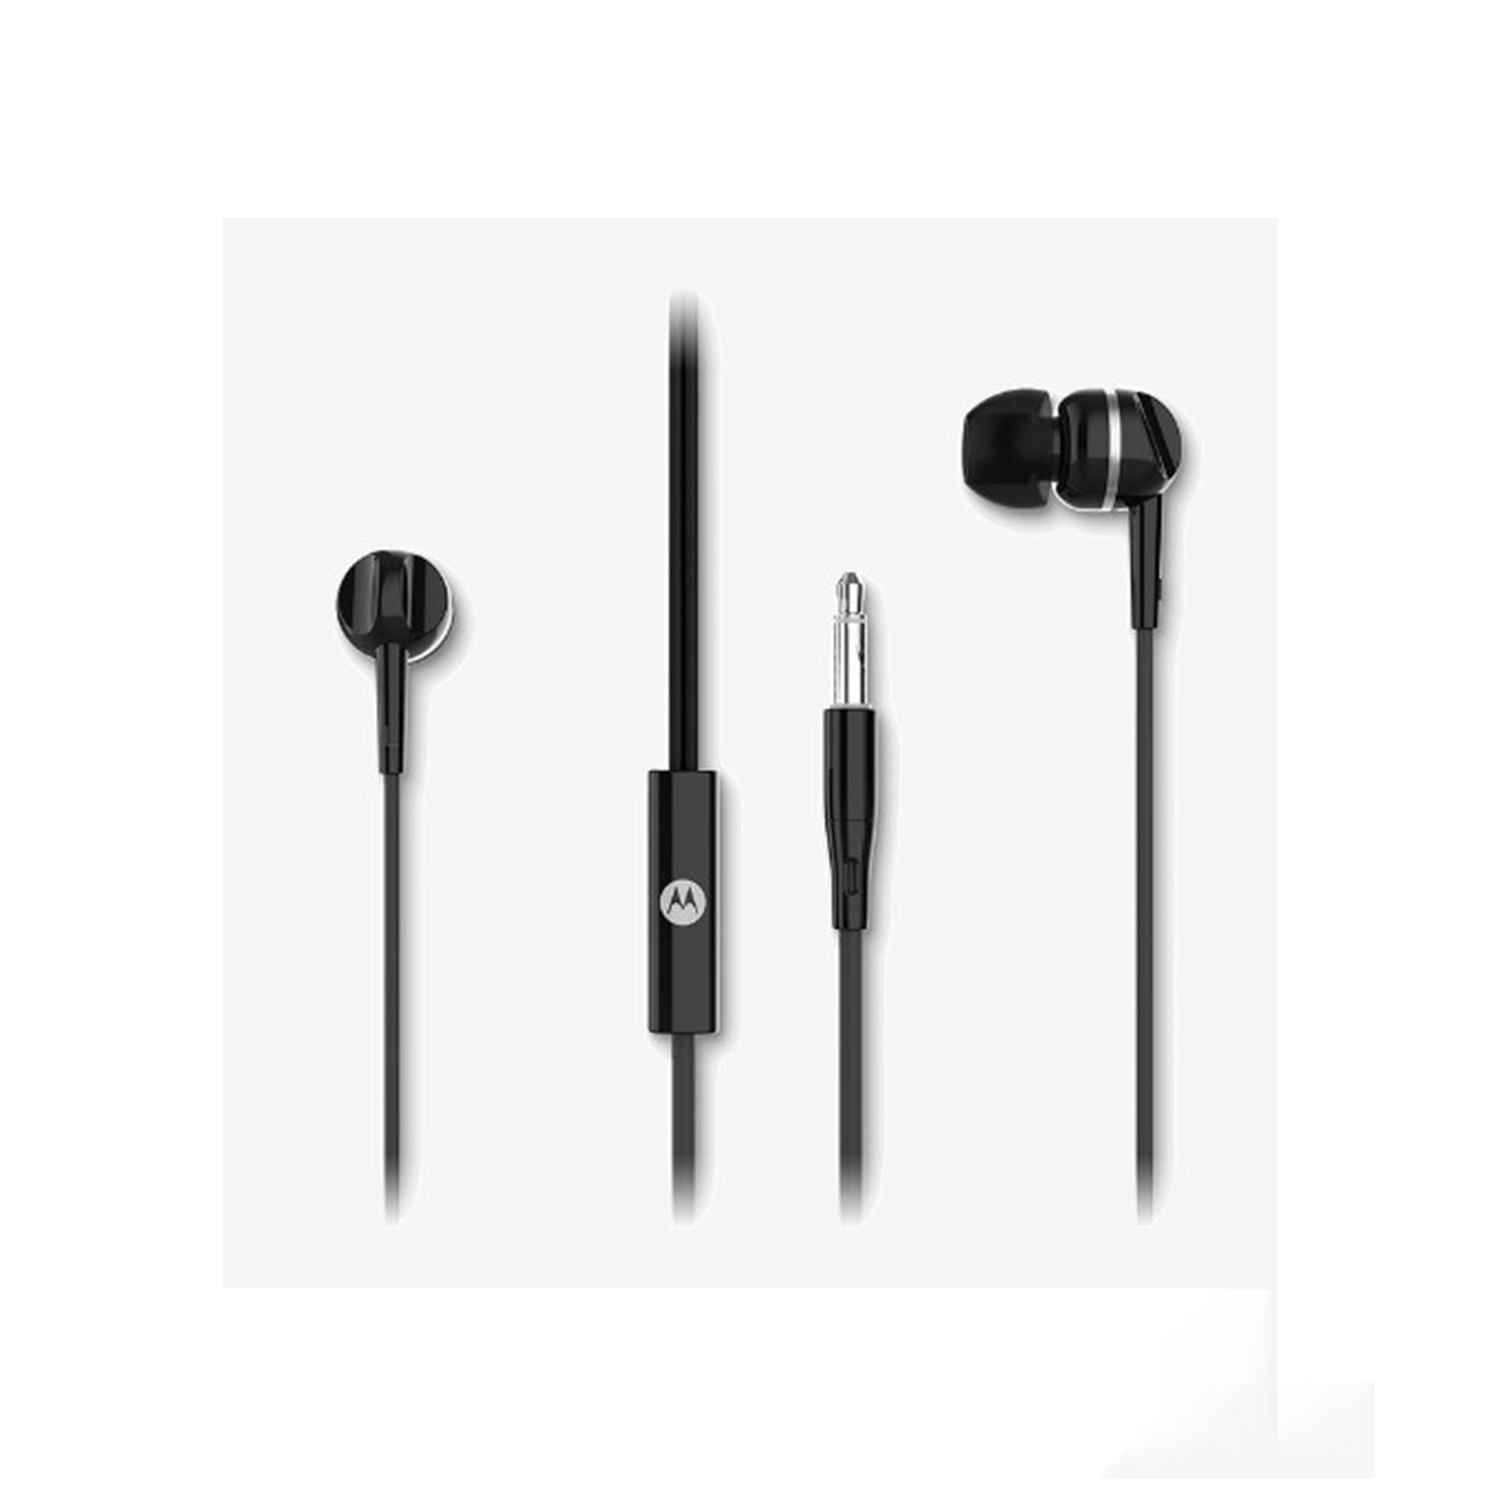 AudIfonos Motorola IN EAR Wired Con Micro Earbuds 105 Negro